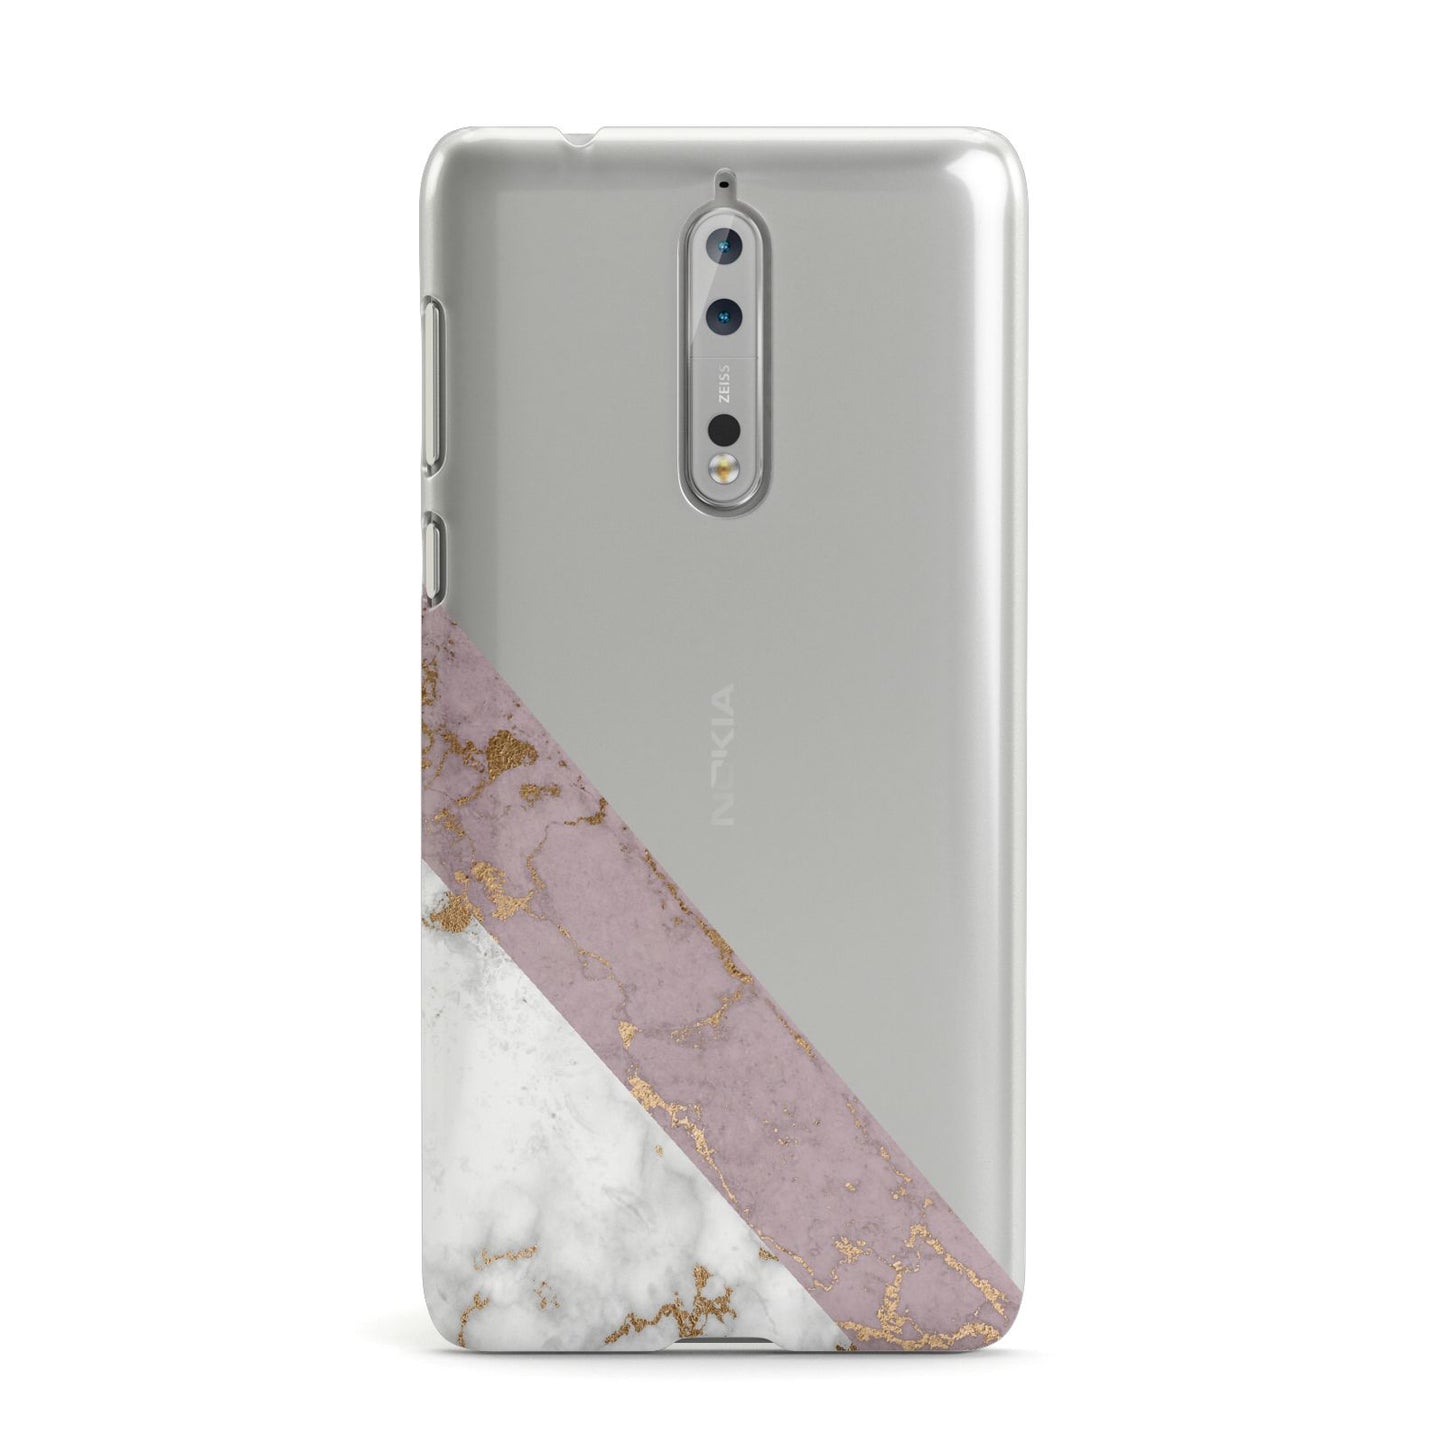 Transparent Pink and White Marble Nokia Case